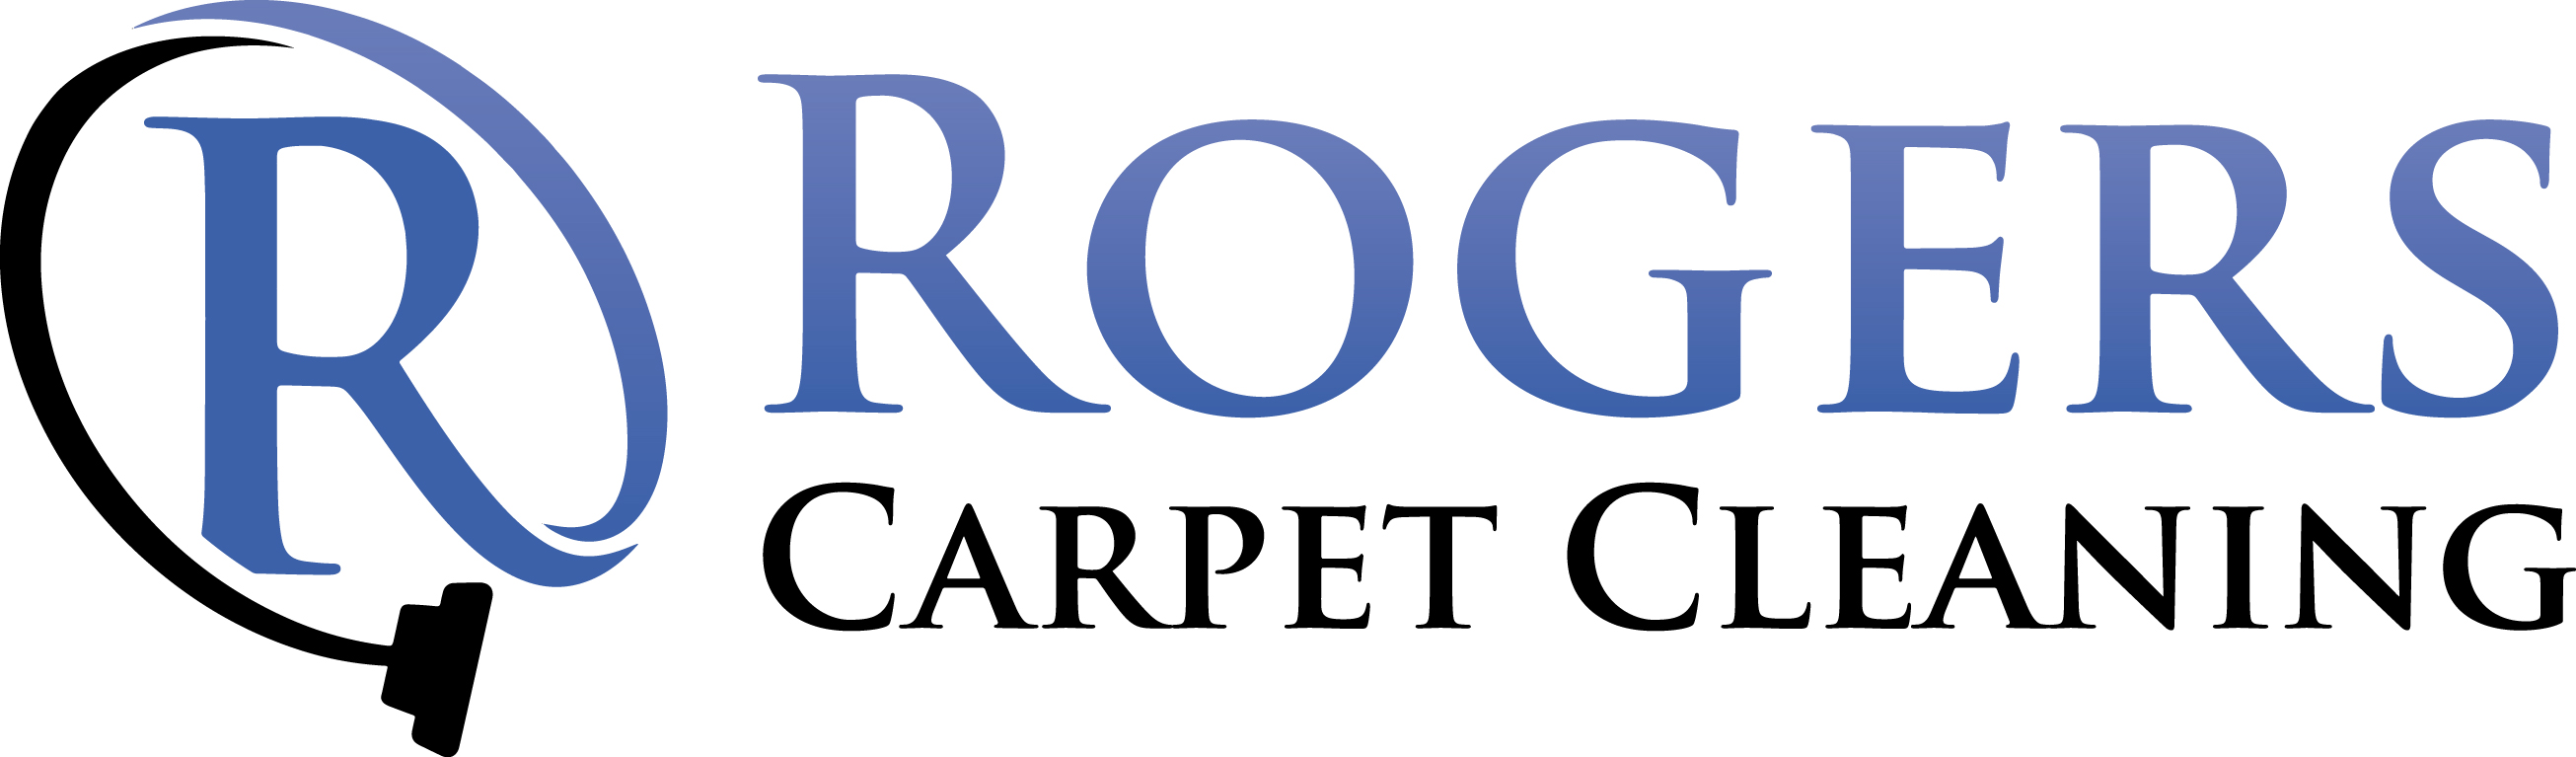 Rogers Carpet Cleaning Logo